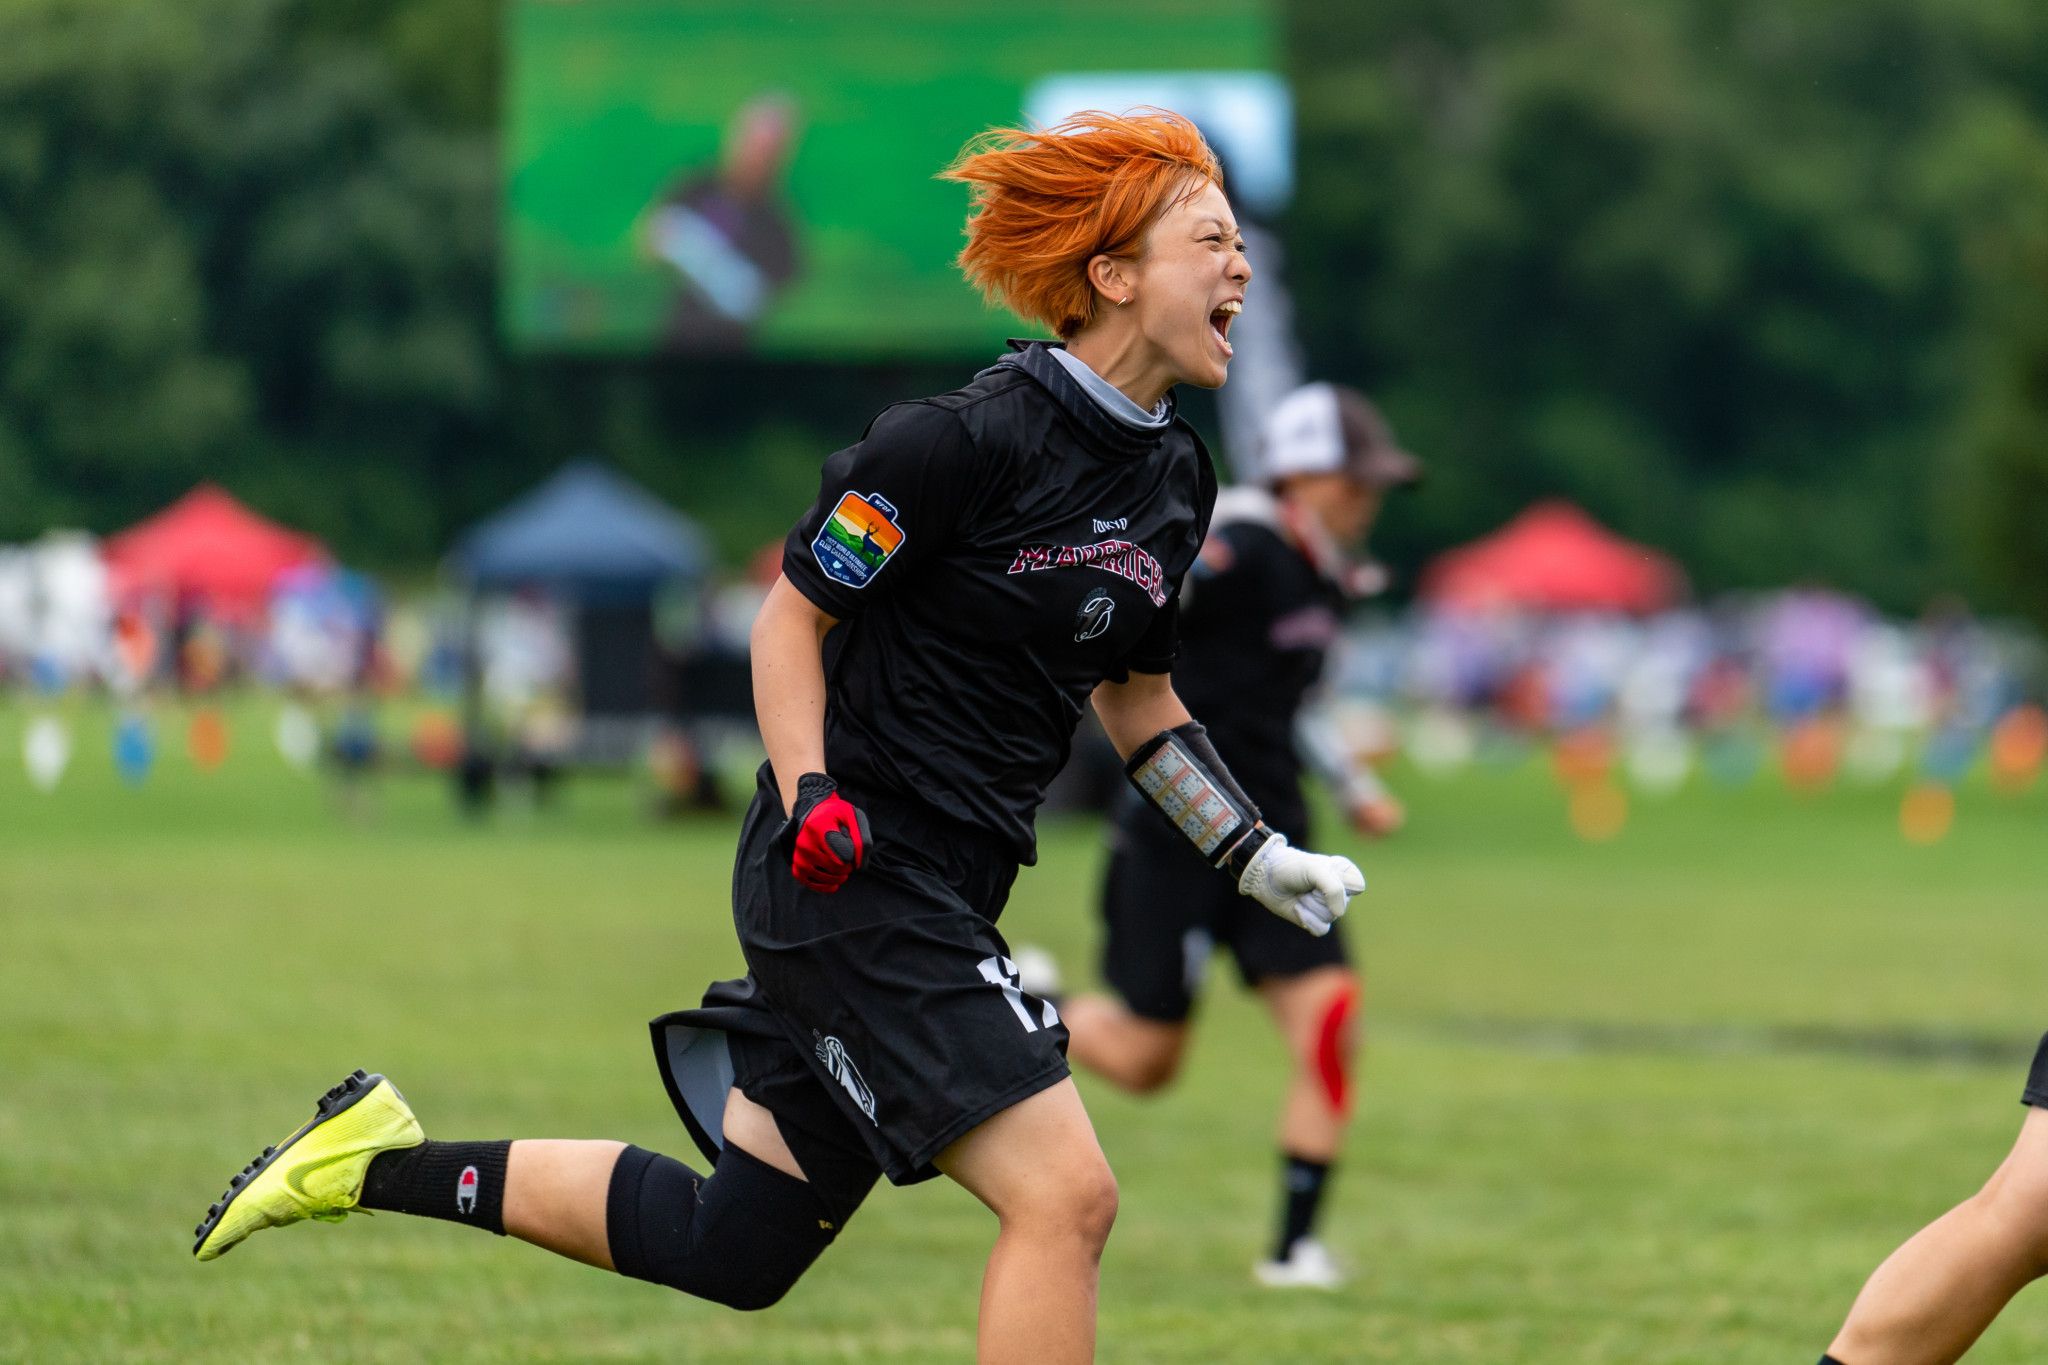 TOKYO Mavericks' Juna Murai passionately celebrated a goal for her team as they secured second in Pool I ©Samuel Hotaling for UltiPhotos